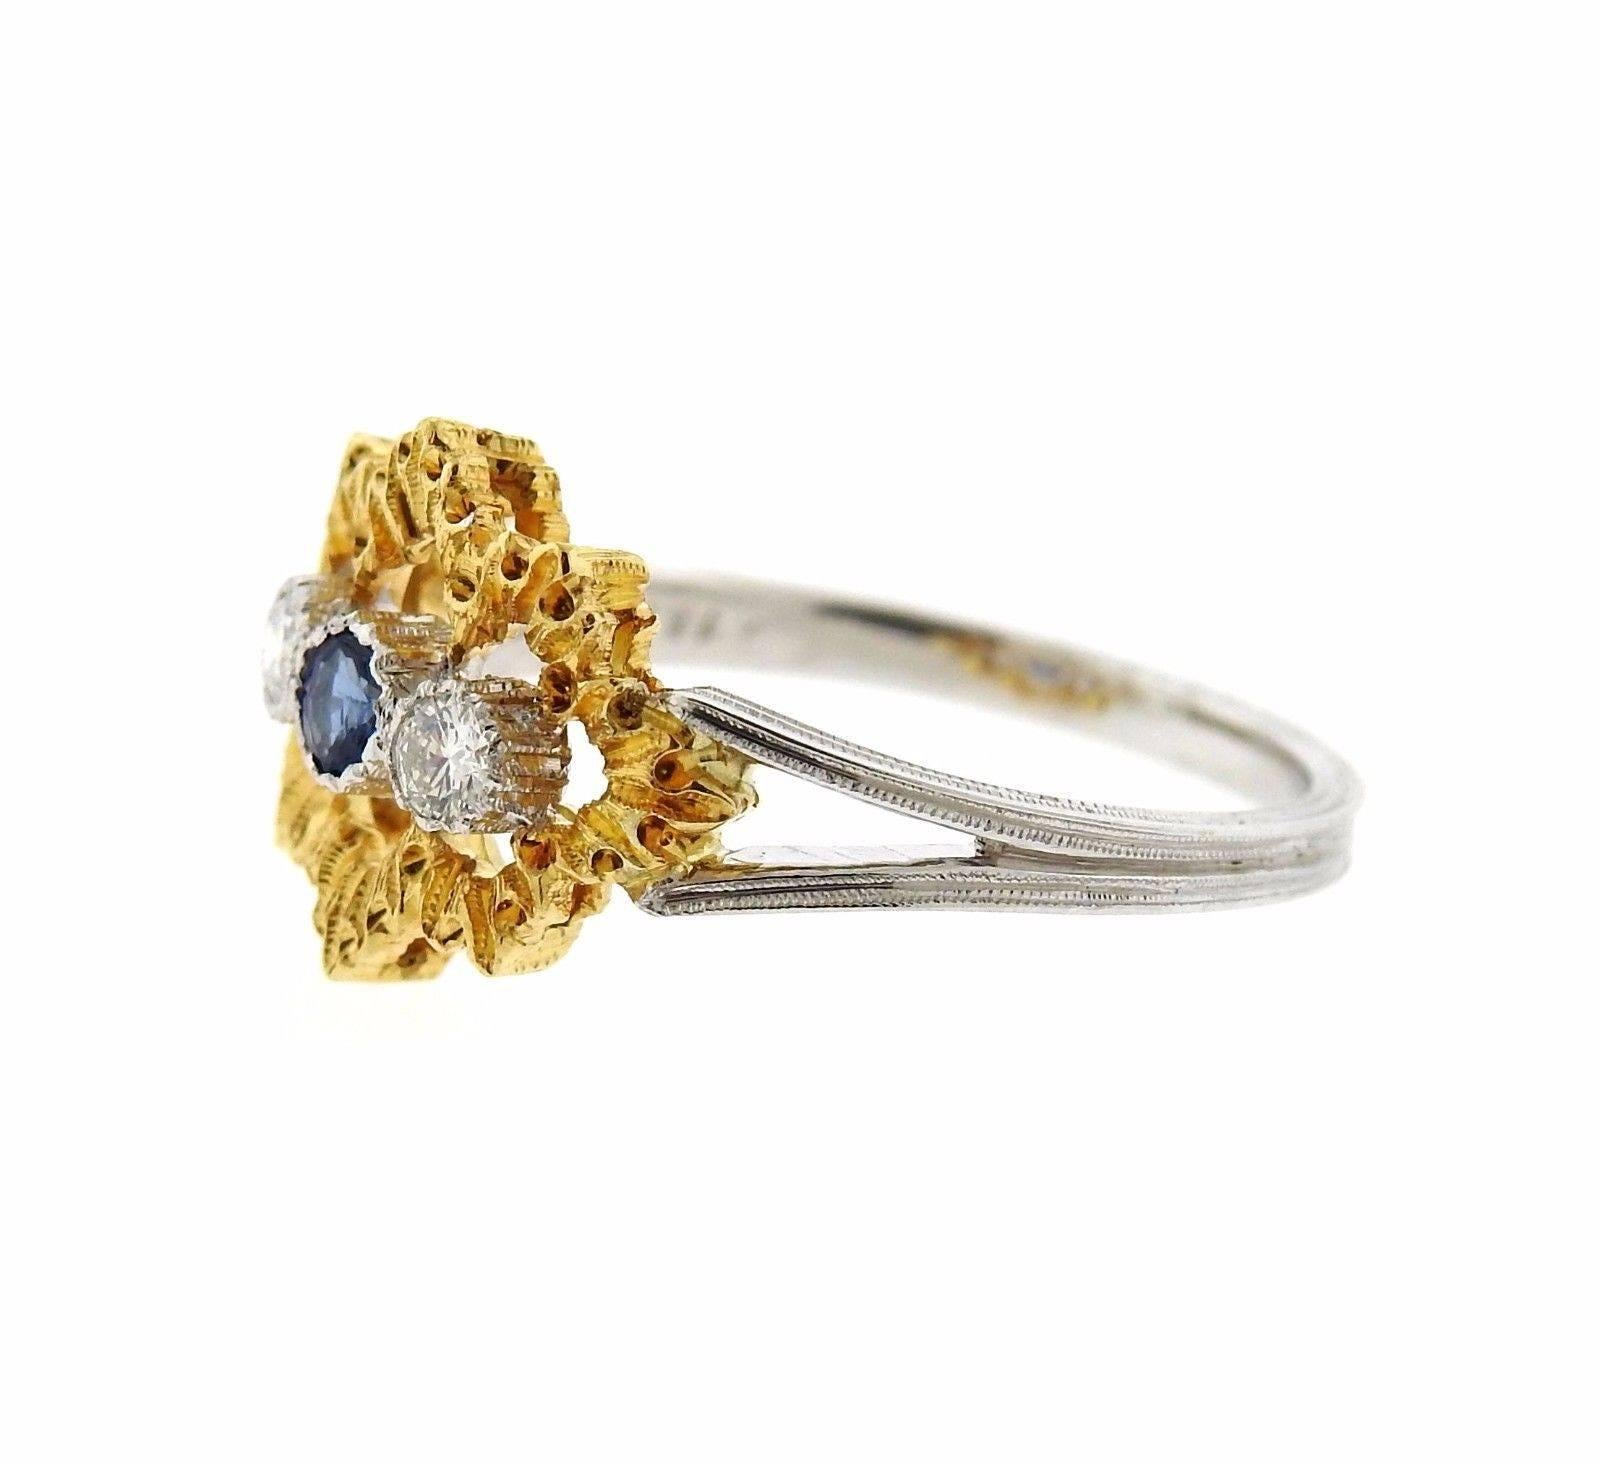 An 18k yellow and white gold ring set with a sapphire and approximately 0.08ctw of H/VS diamonds.  The ring is a size 6, ring top is 11mm x 14mm.  The weight of the piece is 3 grams.  Marked:  Gianmaria Buccellati Italy 18k.  Retail is $7710. Comes